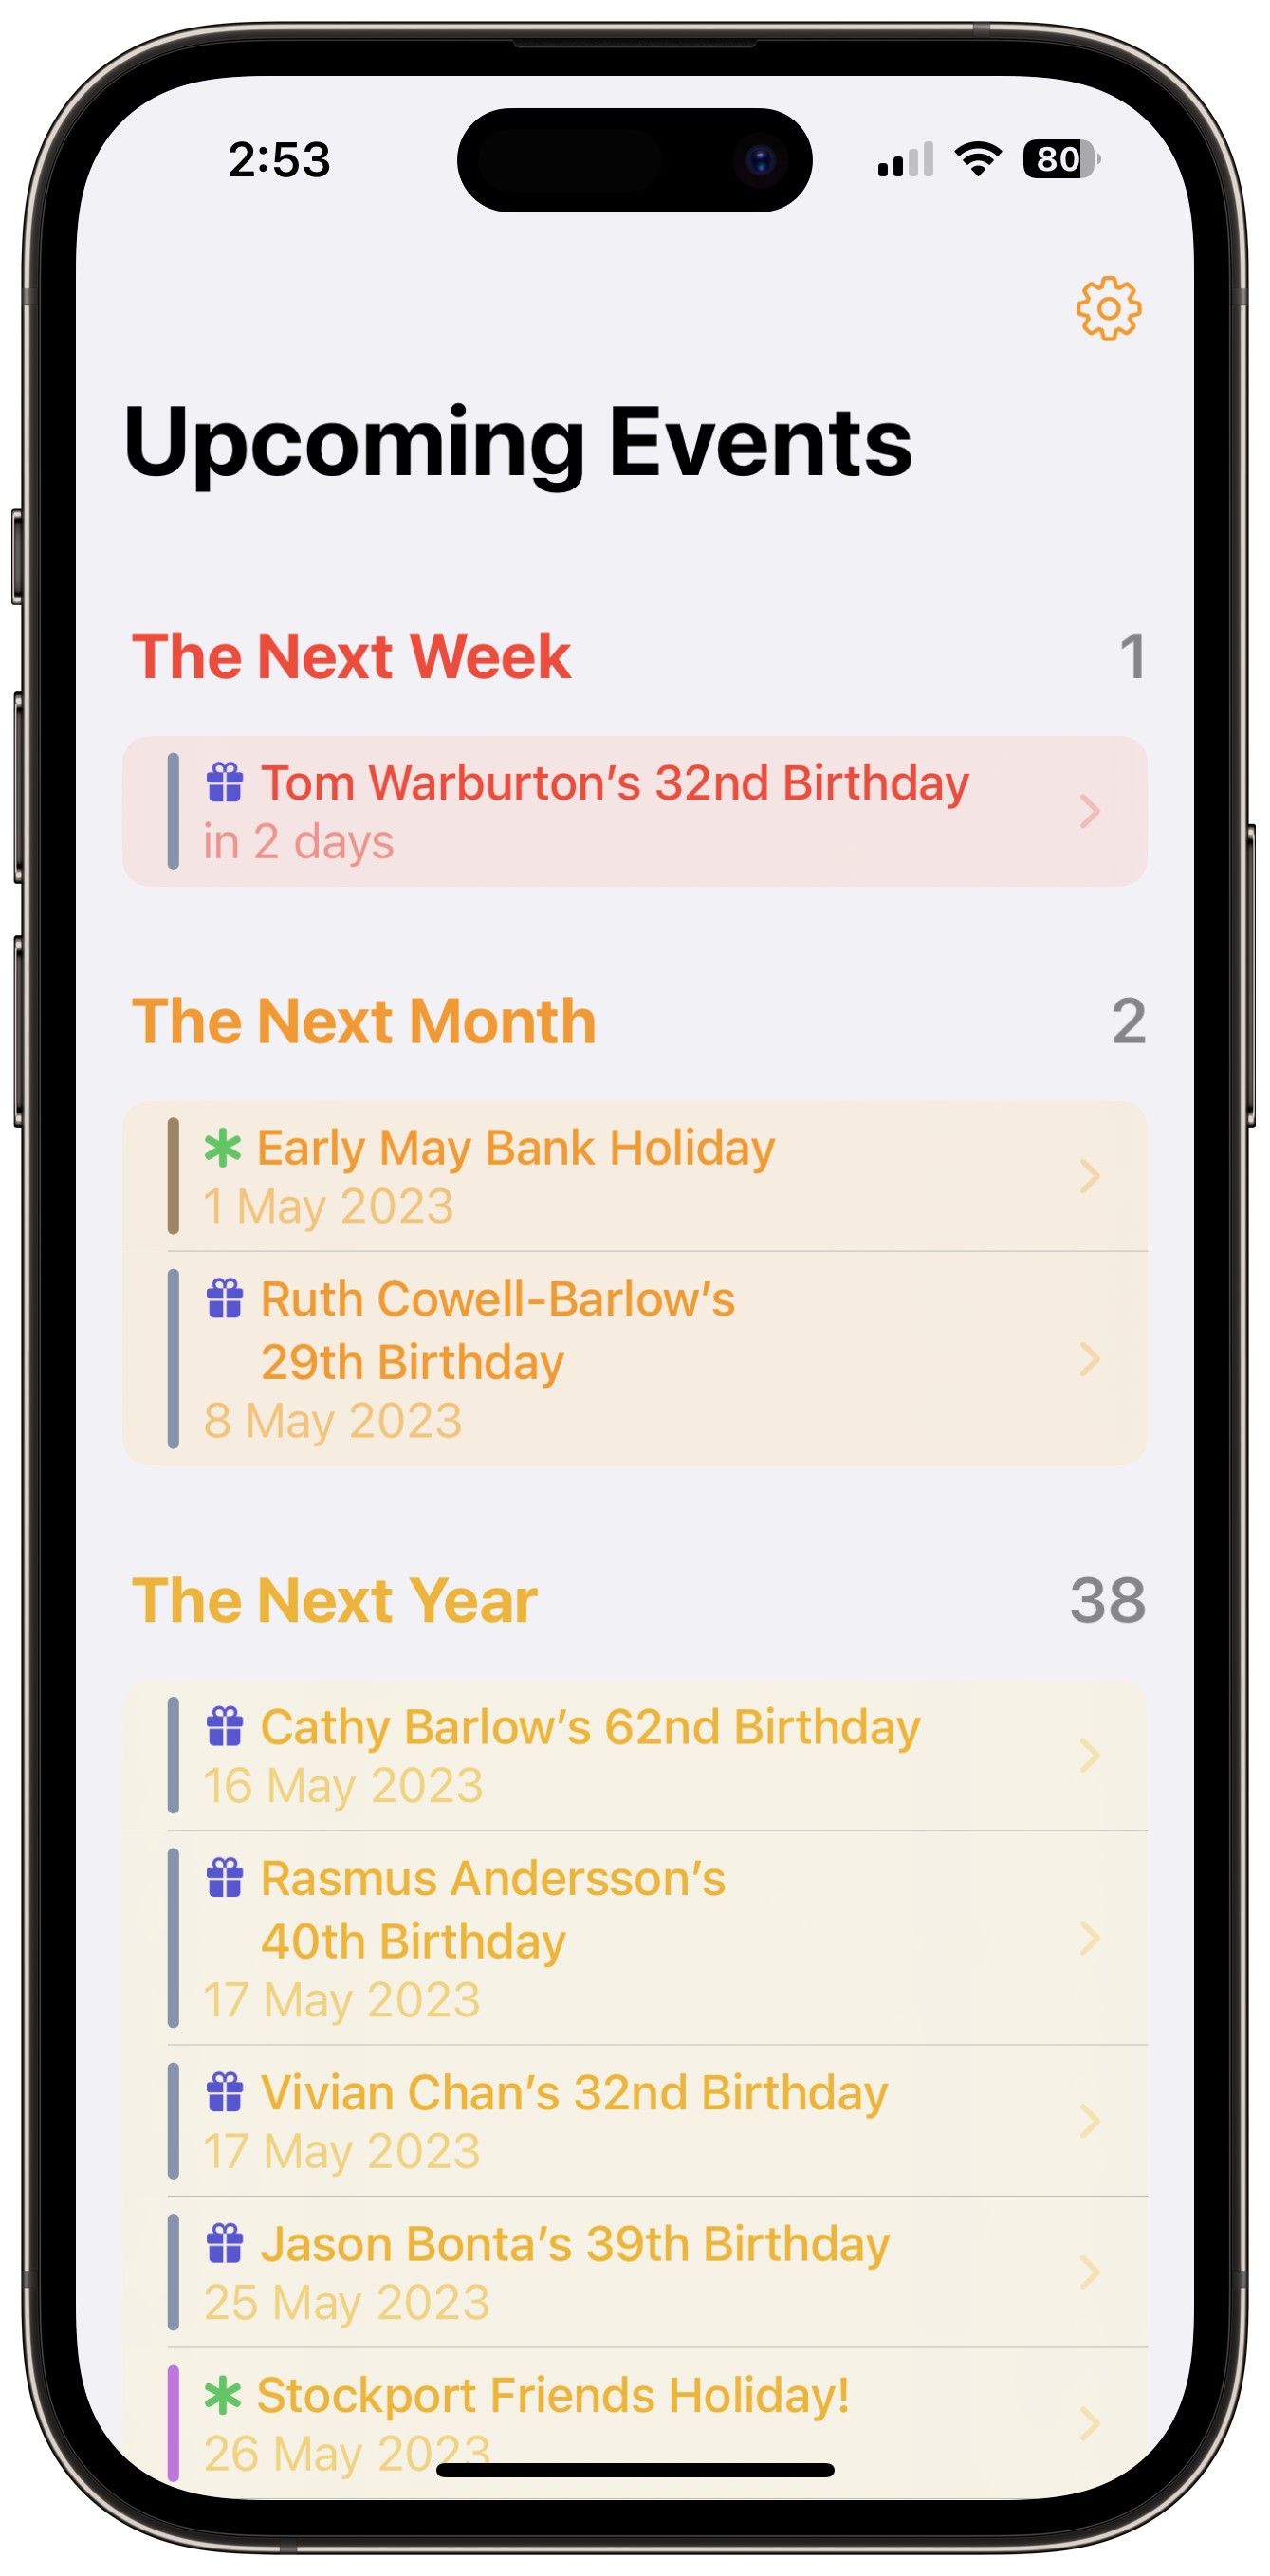 The Eventually app, showing upcoming events in the next week, month, and year